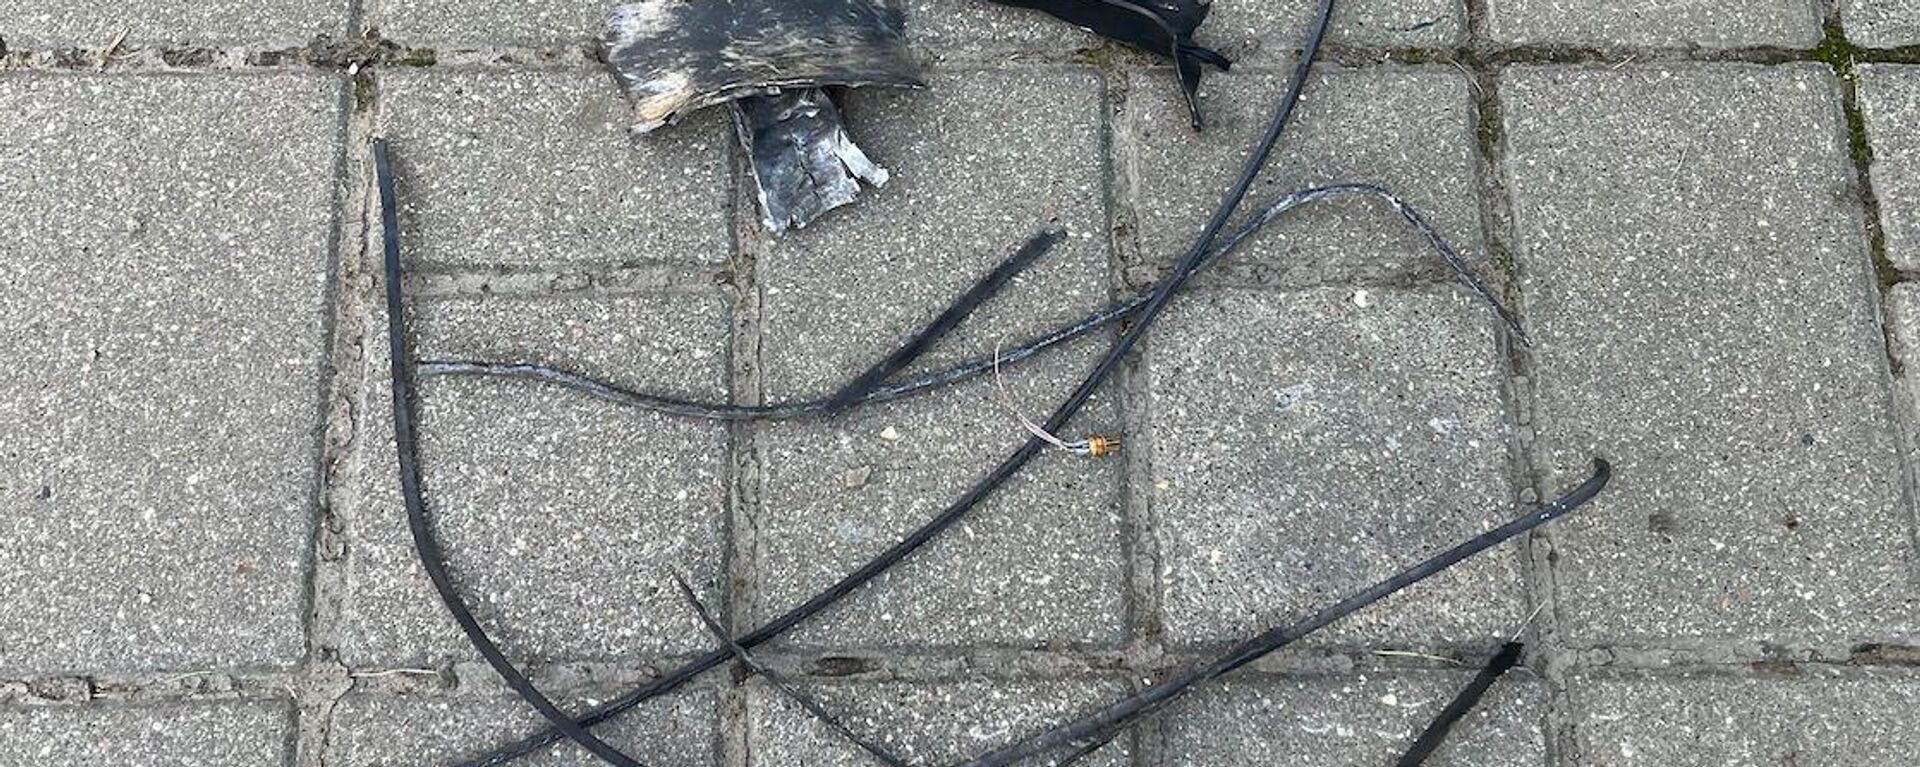 Screenshot from a social media post allegedly depicting the debris from one of the Ukrainian drones downed near Moscow on July 4, 2023  - Sputnik International, 1920, 01.08.2023